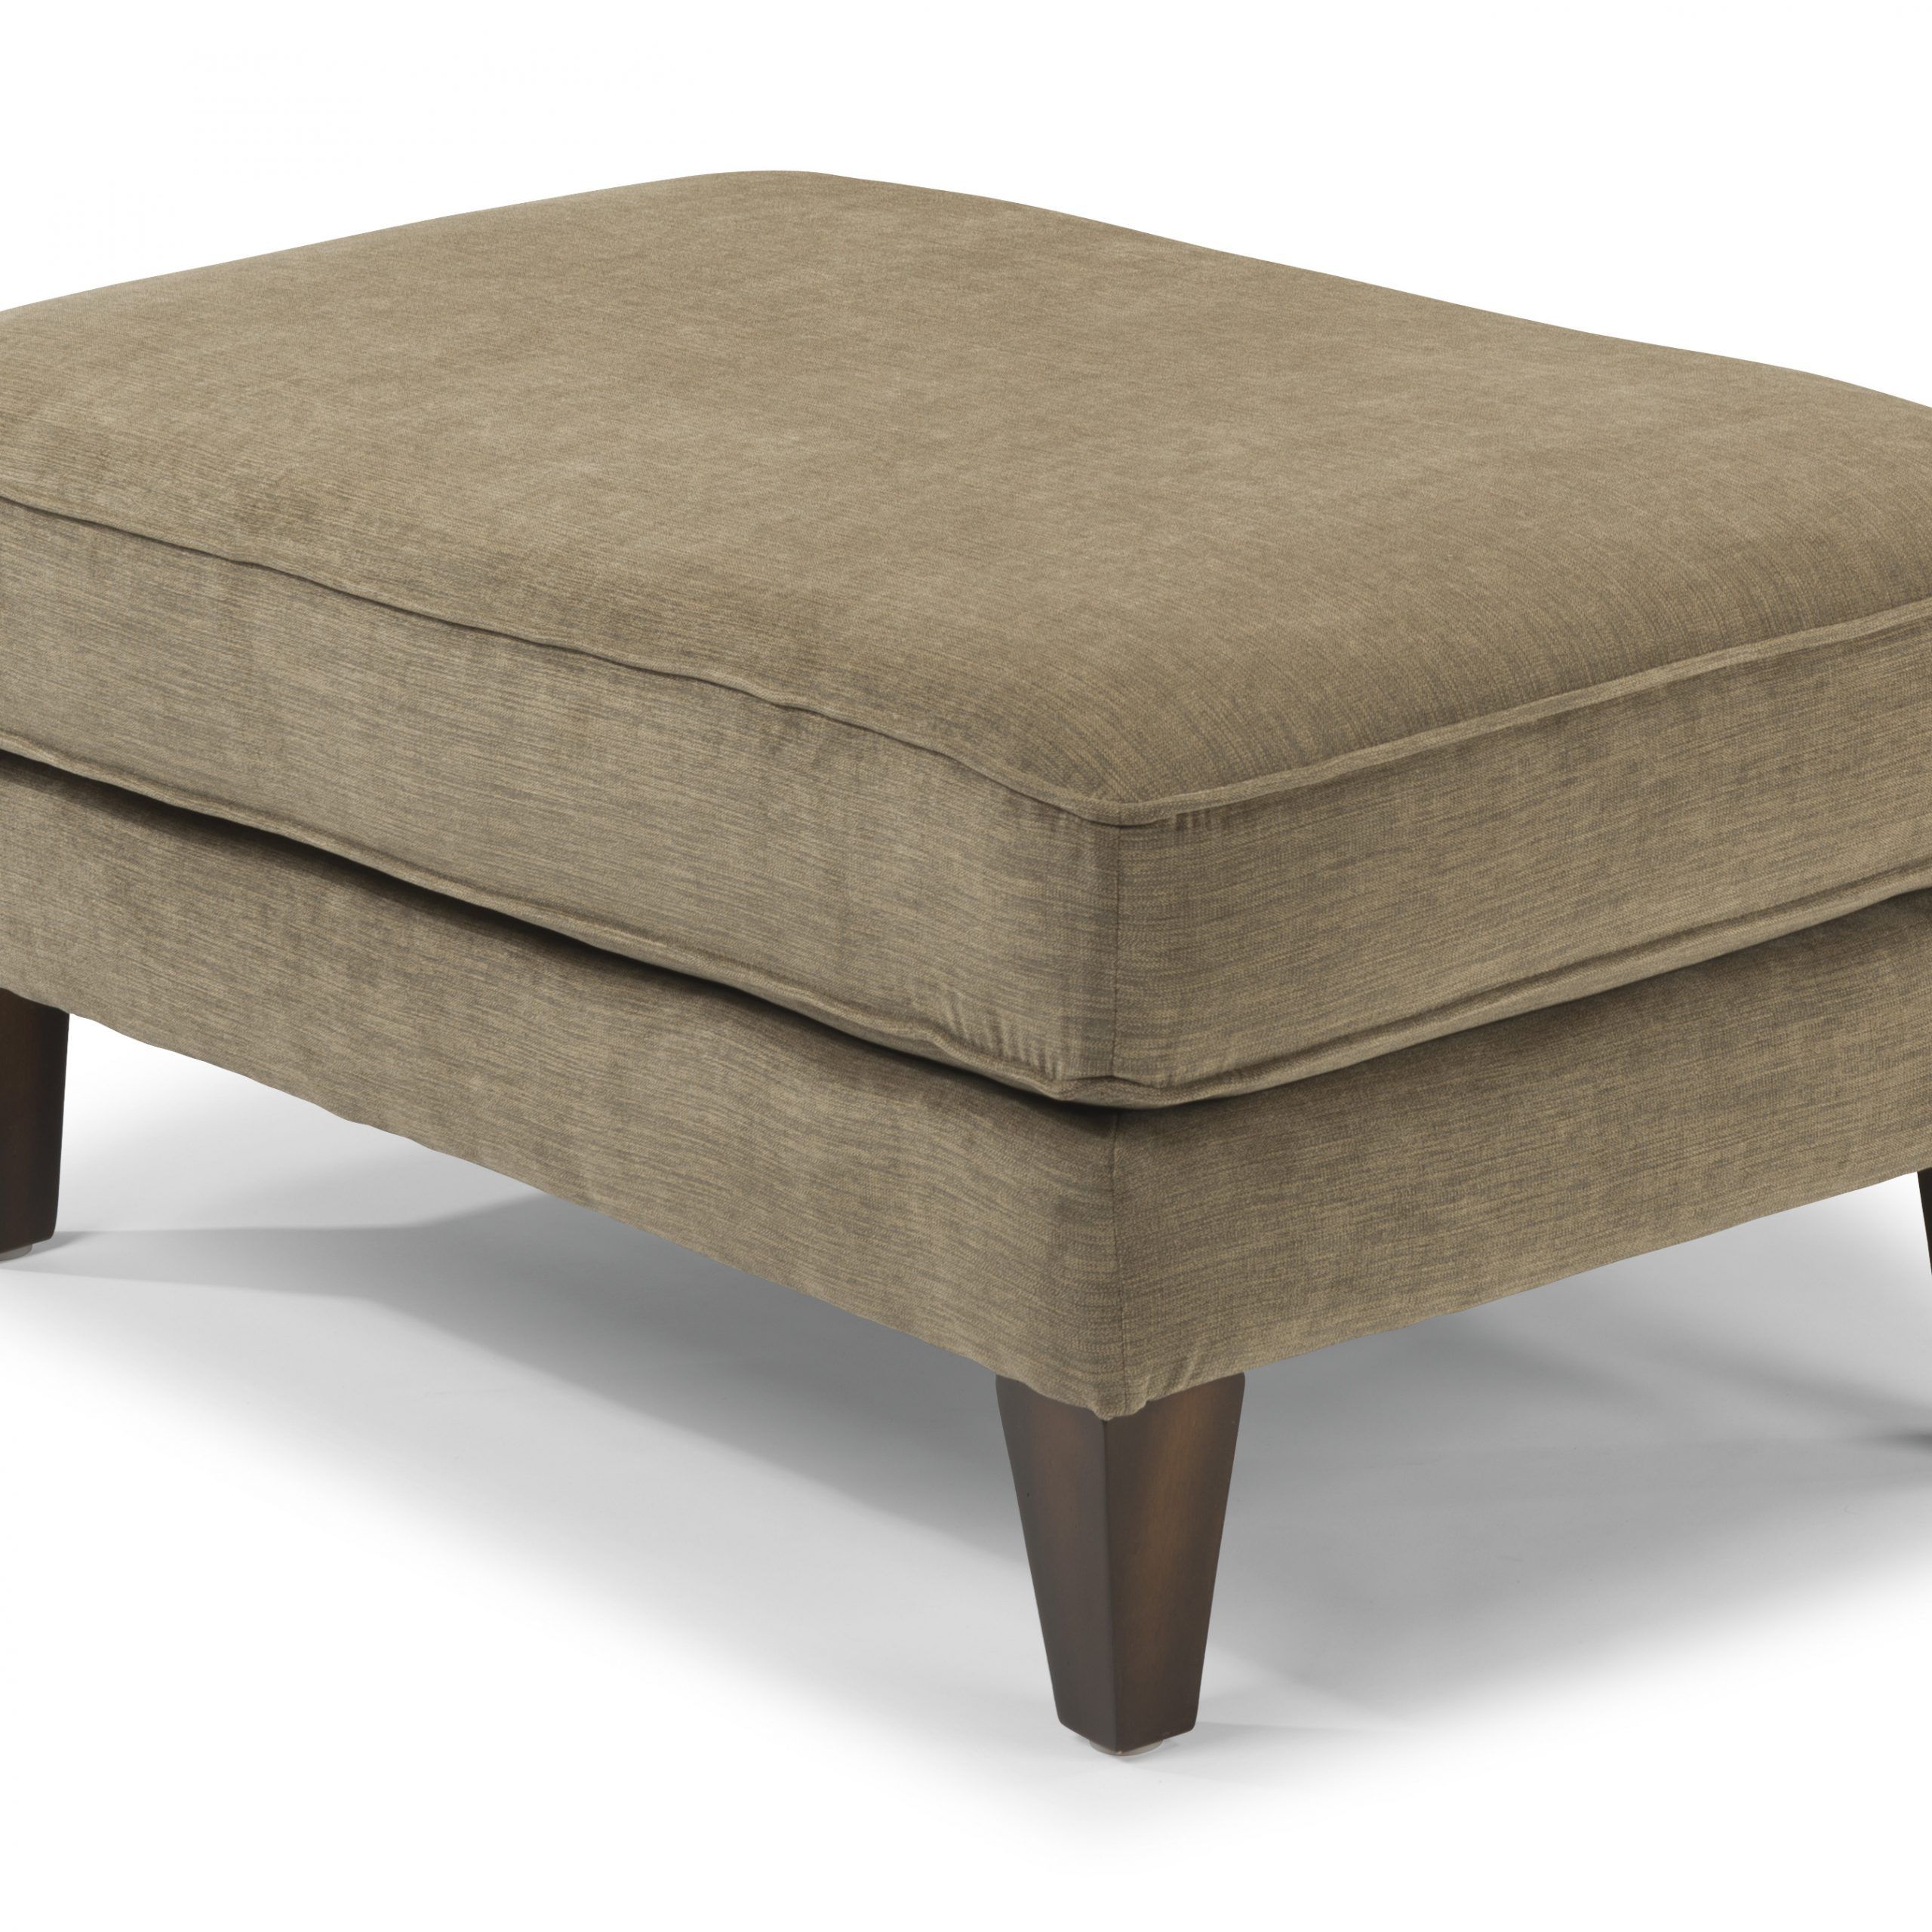 Popular Fabric Oversized Pouf Ottomans In Fabric Cocktail Ottomanflexsteel Furniture – Nis (View 7 of 10)